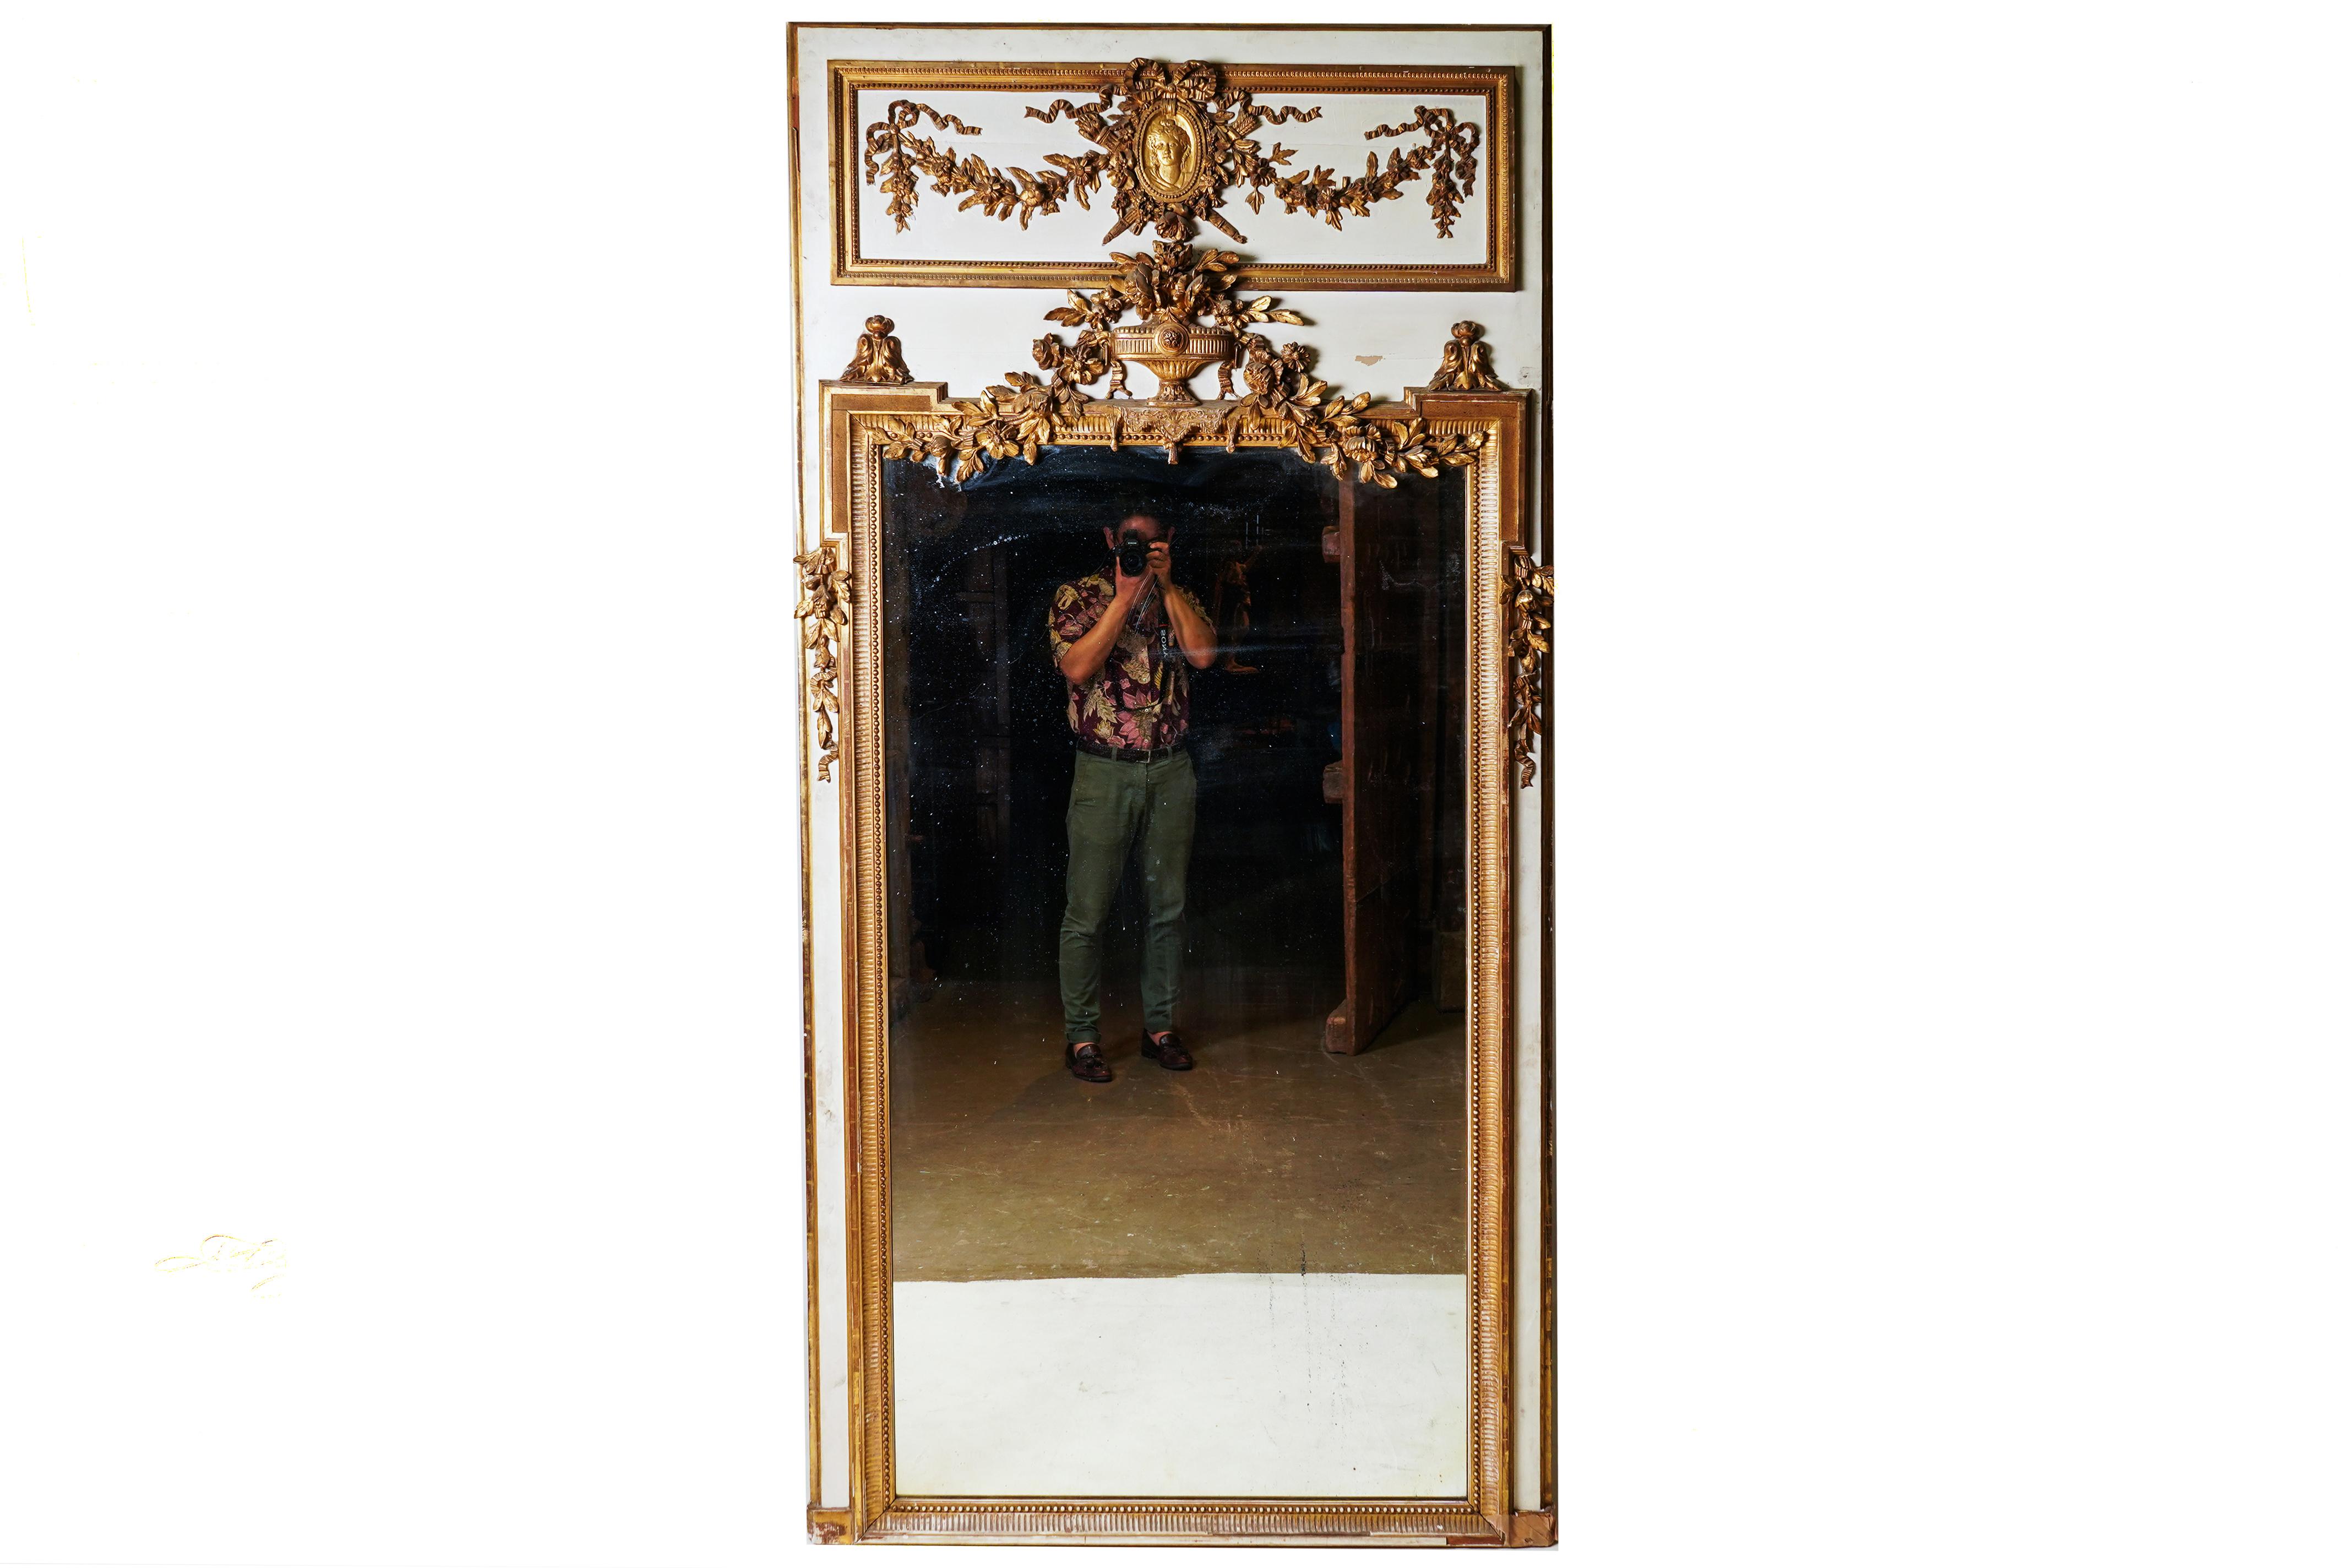 This impressively scaled and richly decorated trumeau mirror is from Paris, France and made from pine wood, gesso and genuine gold gilt. The mirror glass is antique glass with silvered backing, possibly original to the piece. The mirror has minor